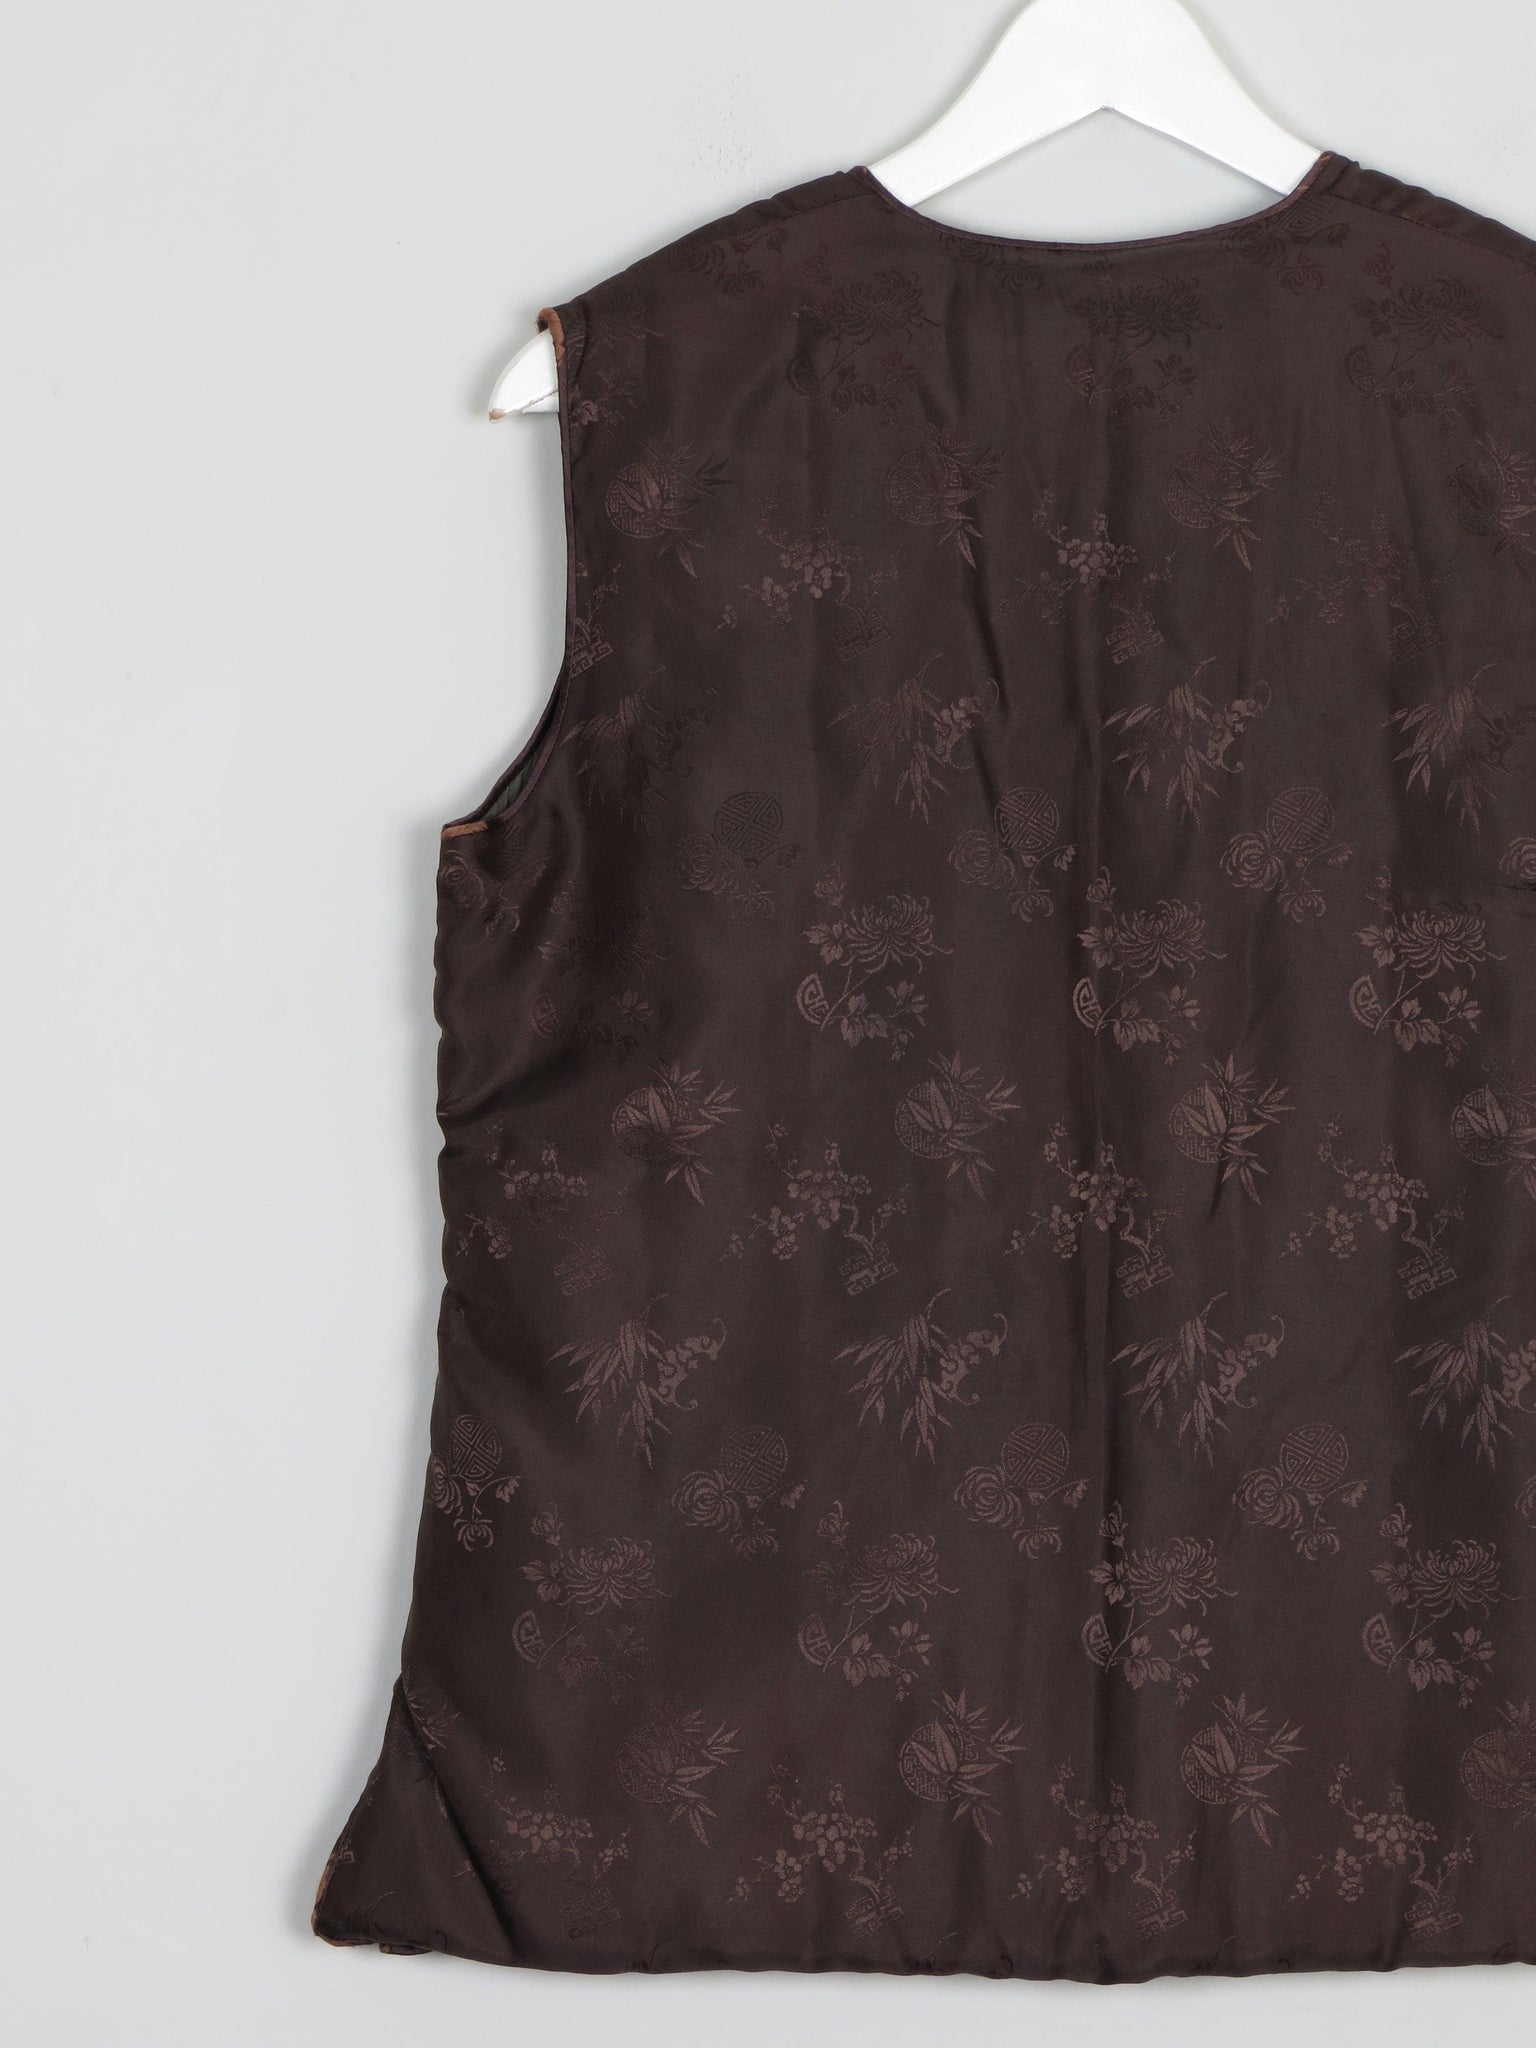 Brown Vintage Chinese Quilted Waistcoat XS 6/8 - The Harlequin